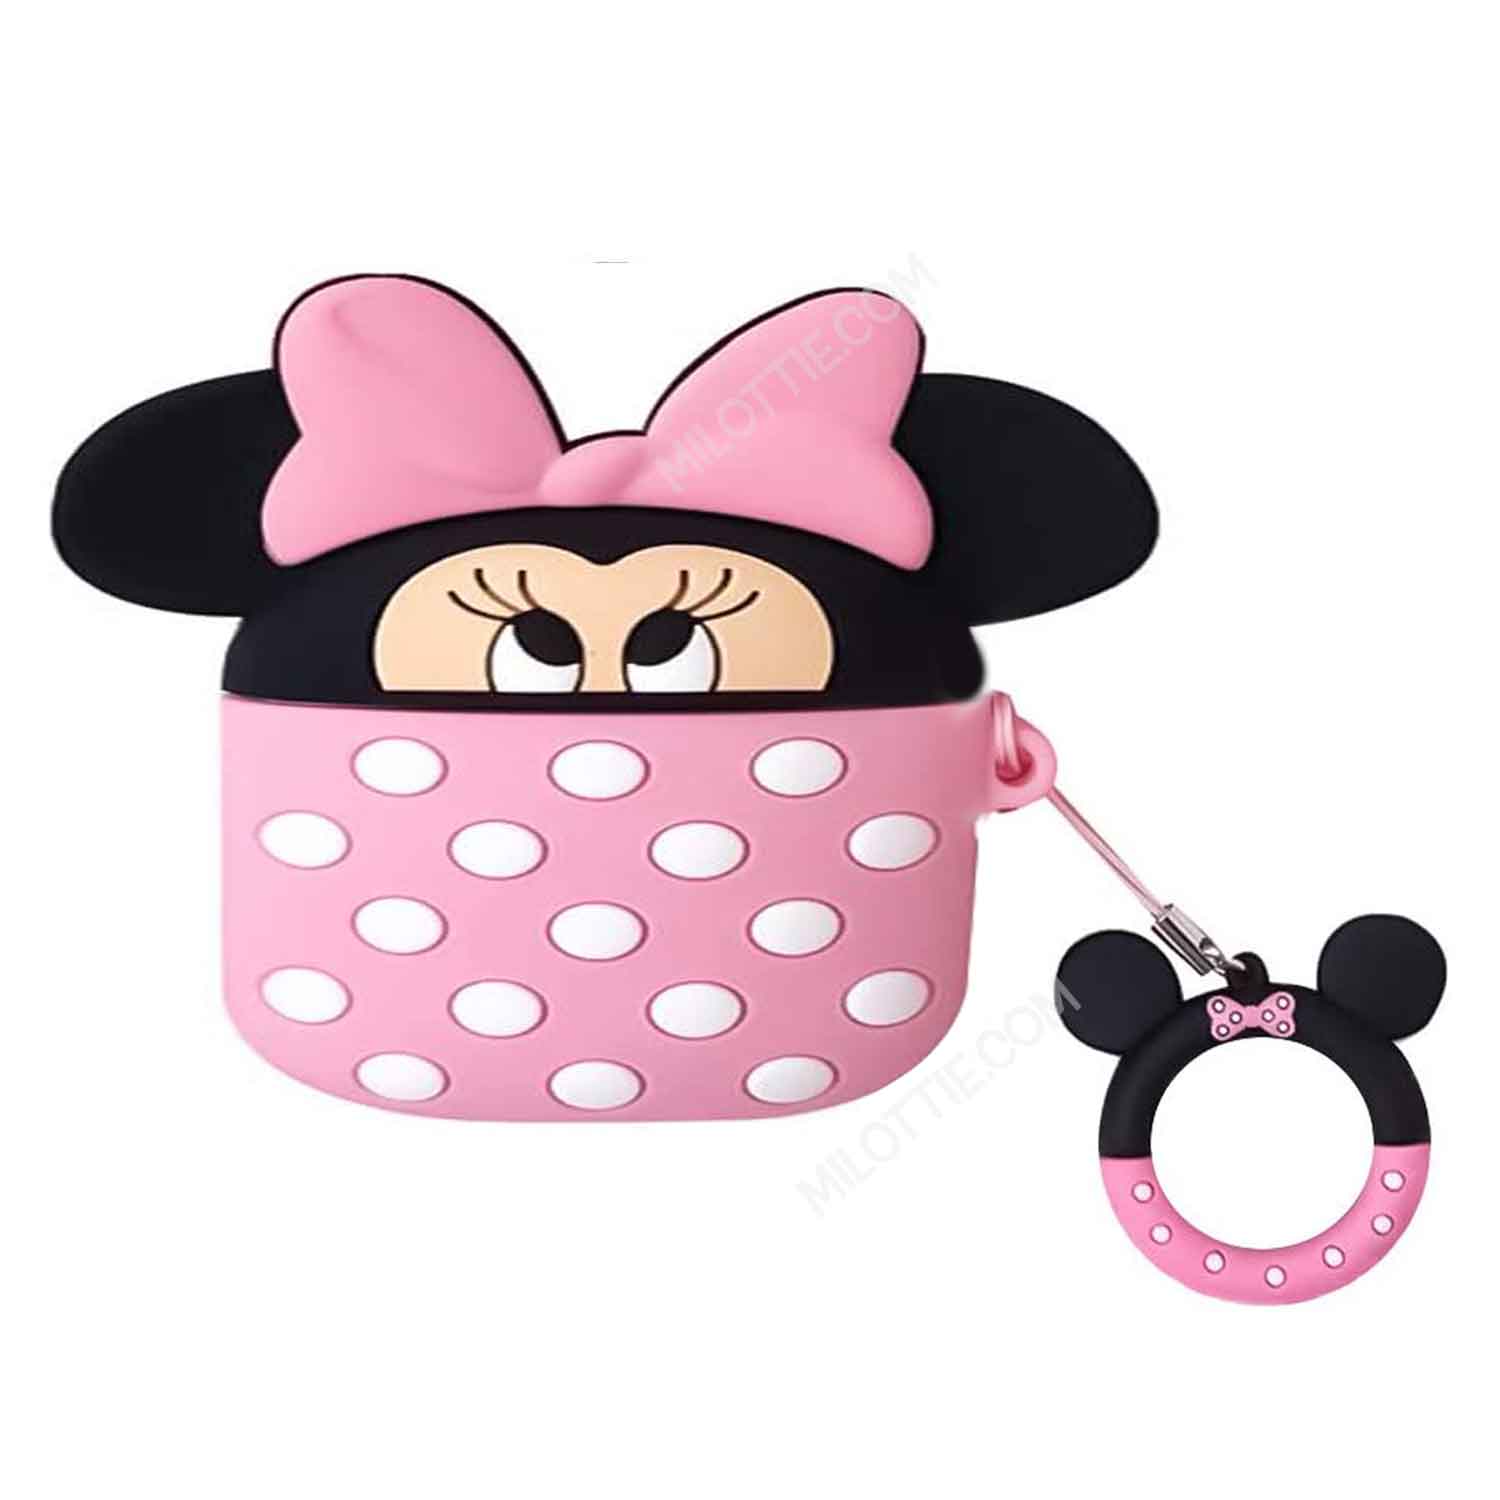 Minnie Mouse Apple Airpods Case